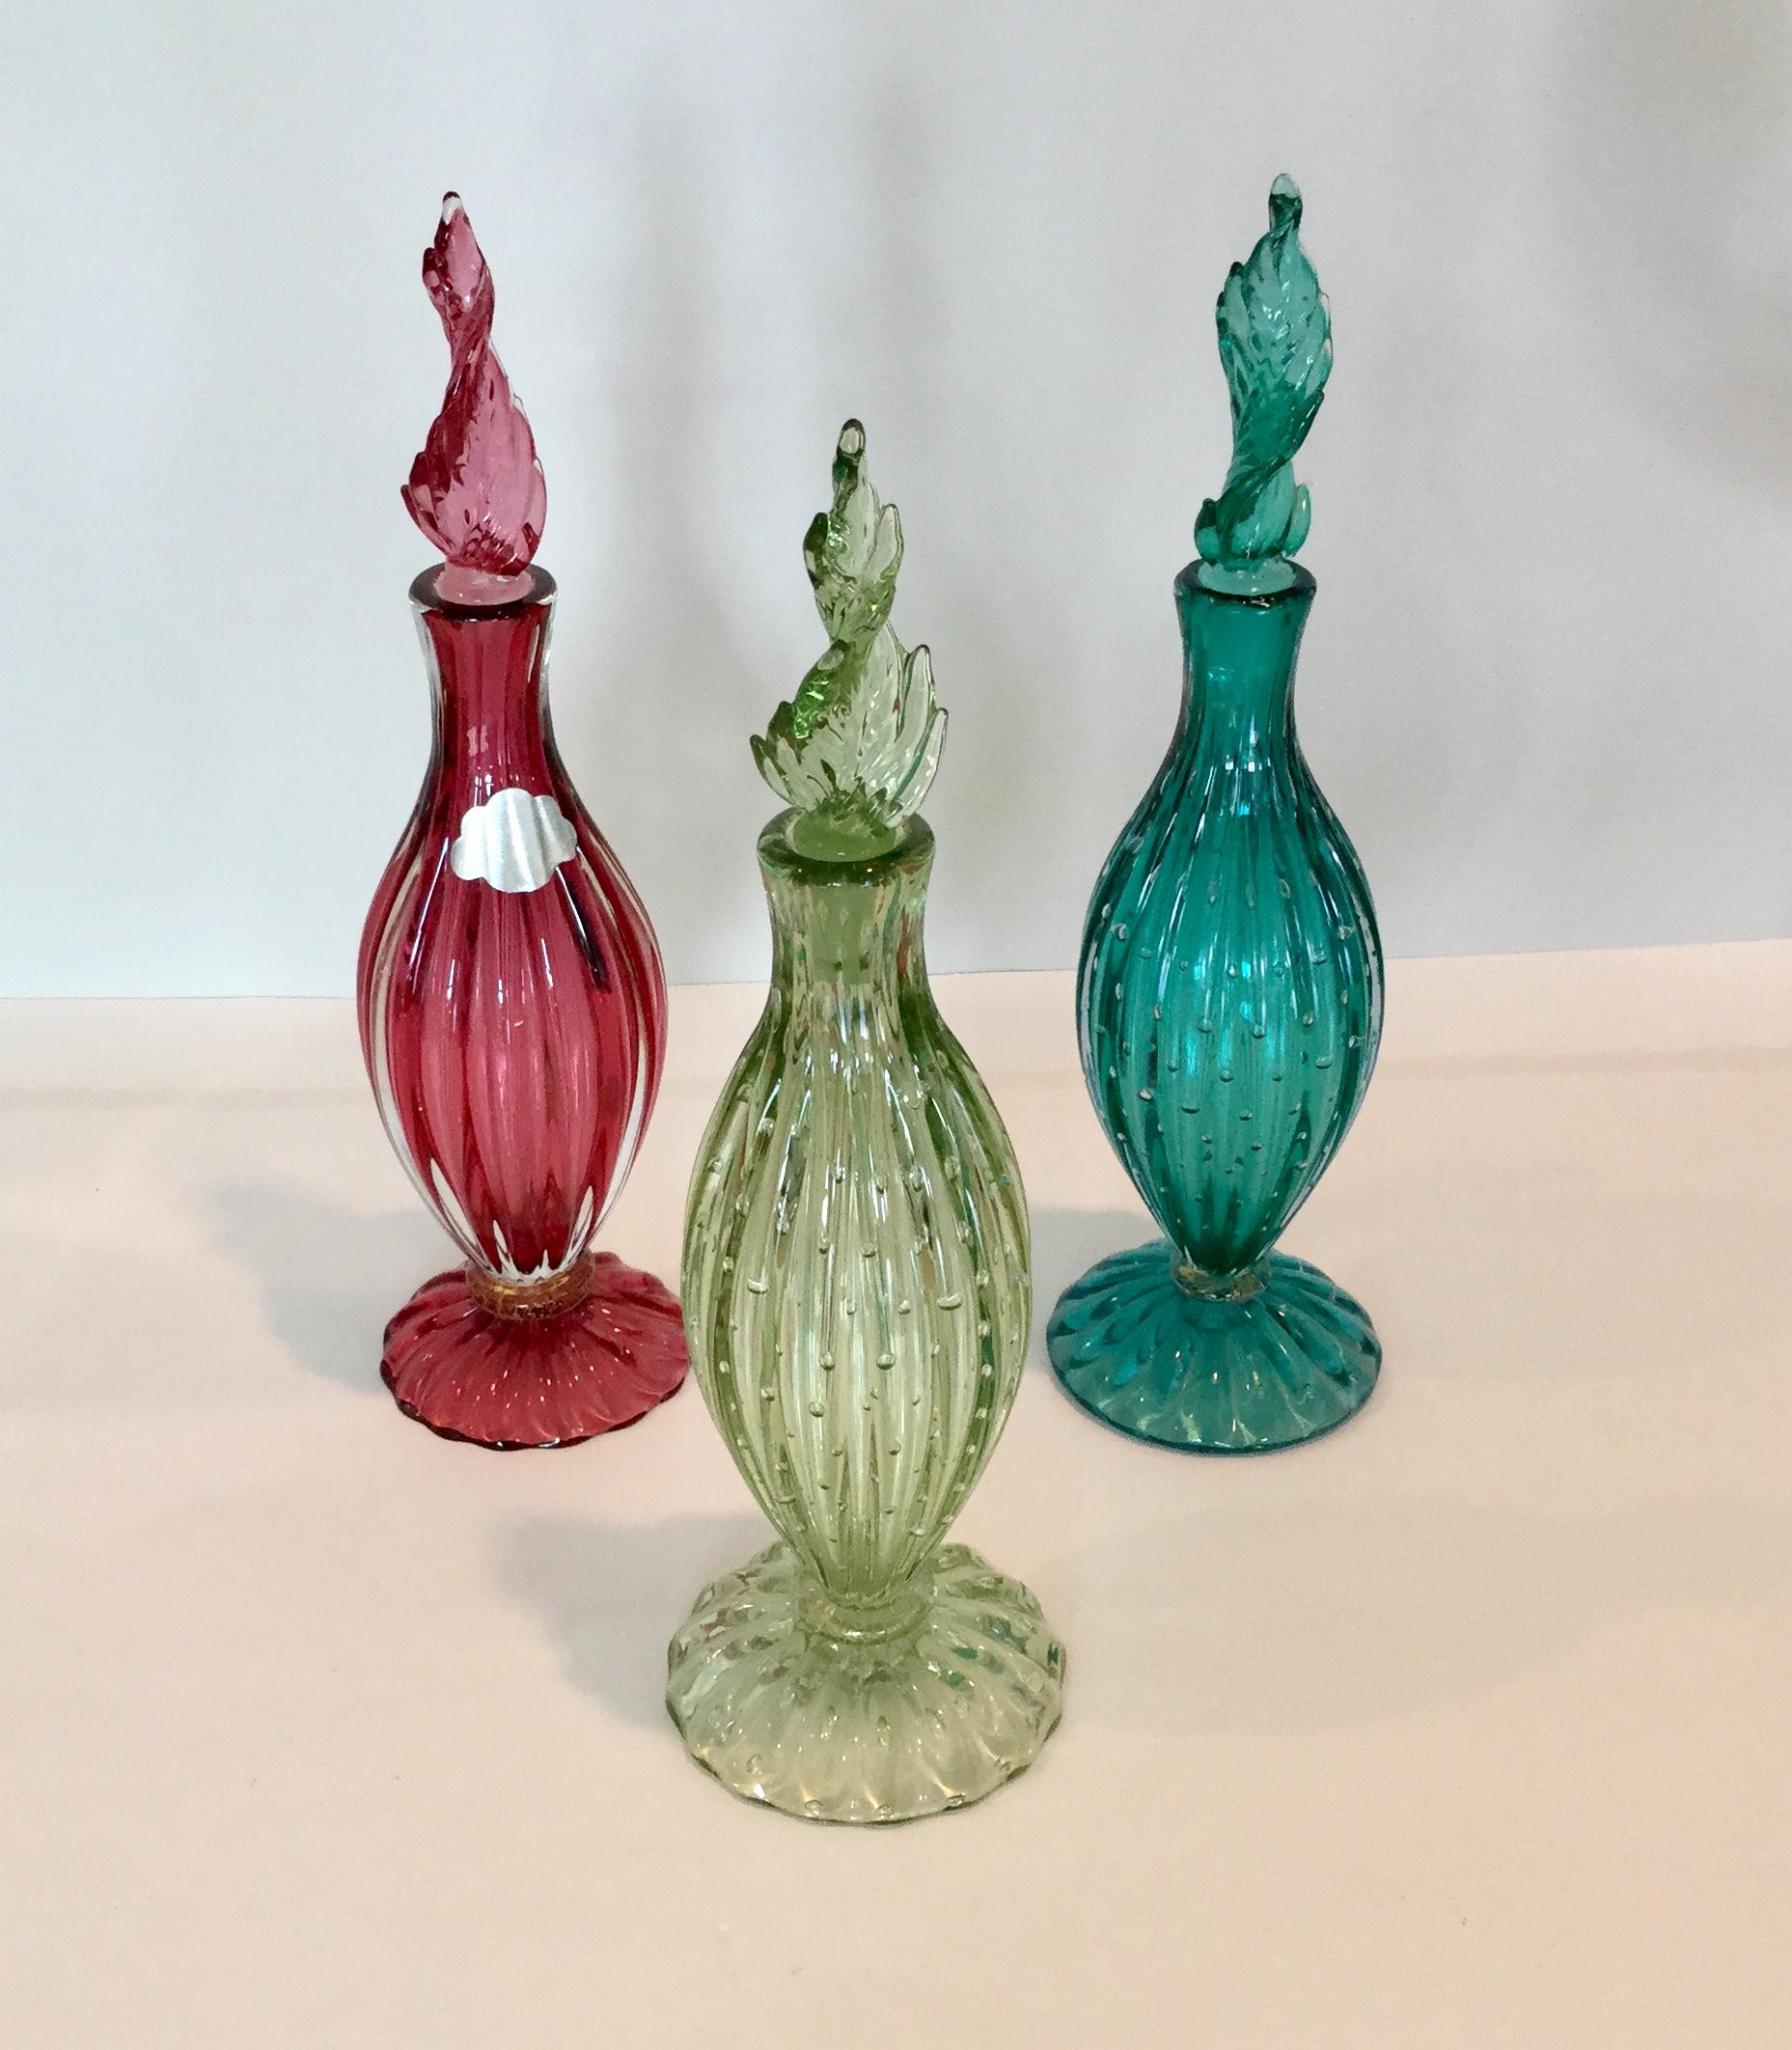 Group of 3 Murano decanters by Alfredo Barbini. 1 retains an original label. Great collector display with seldom seen colors.